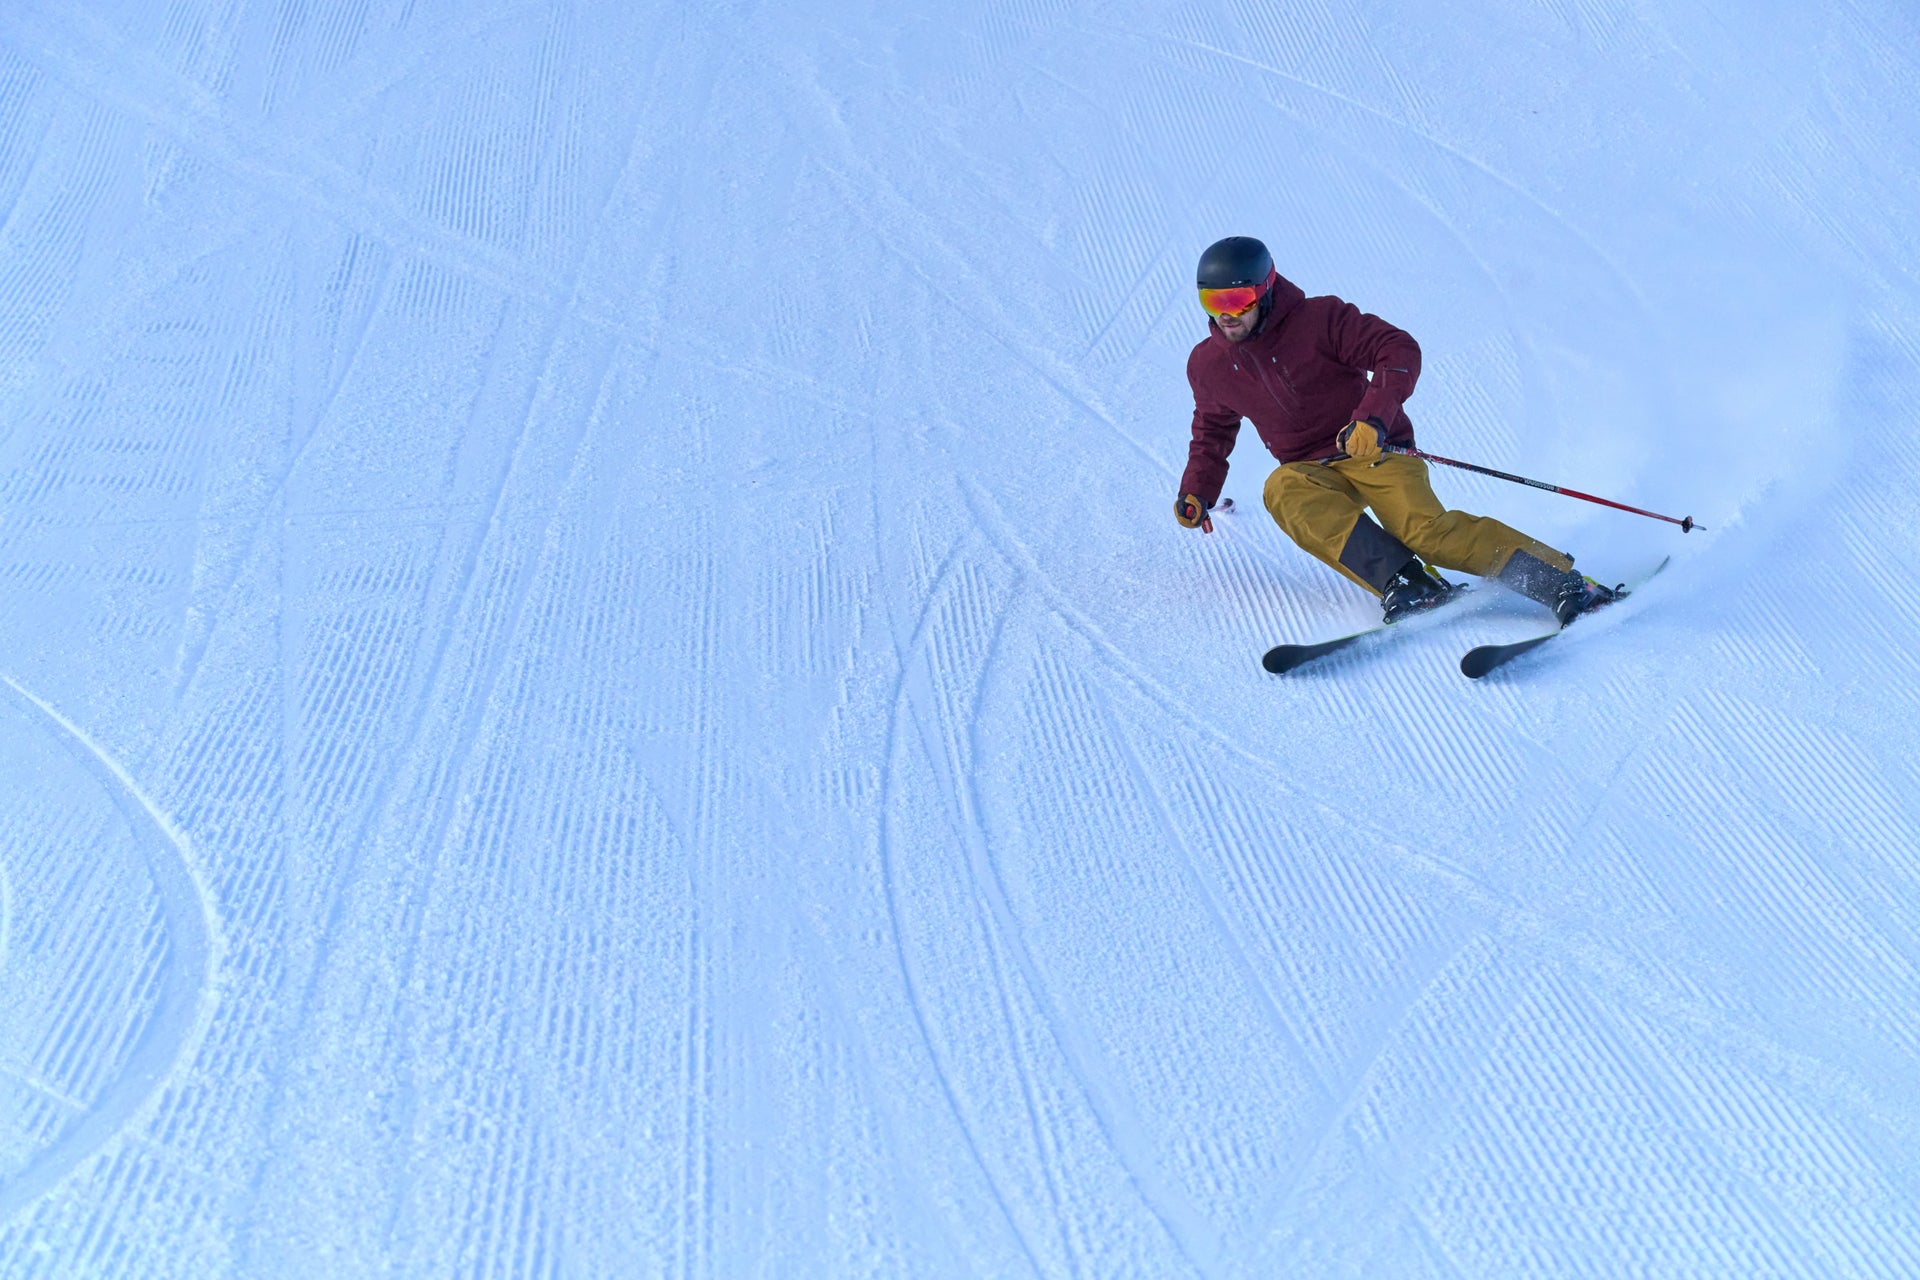 Untrakt | A skier in a maroon jacket and yellow pants making a turn on a groomed slope